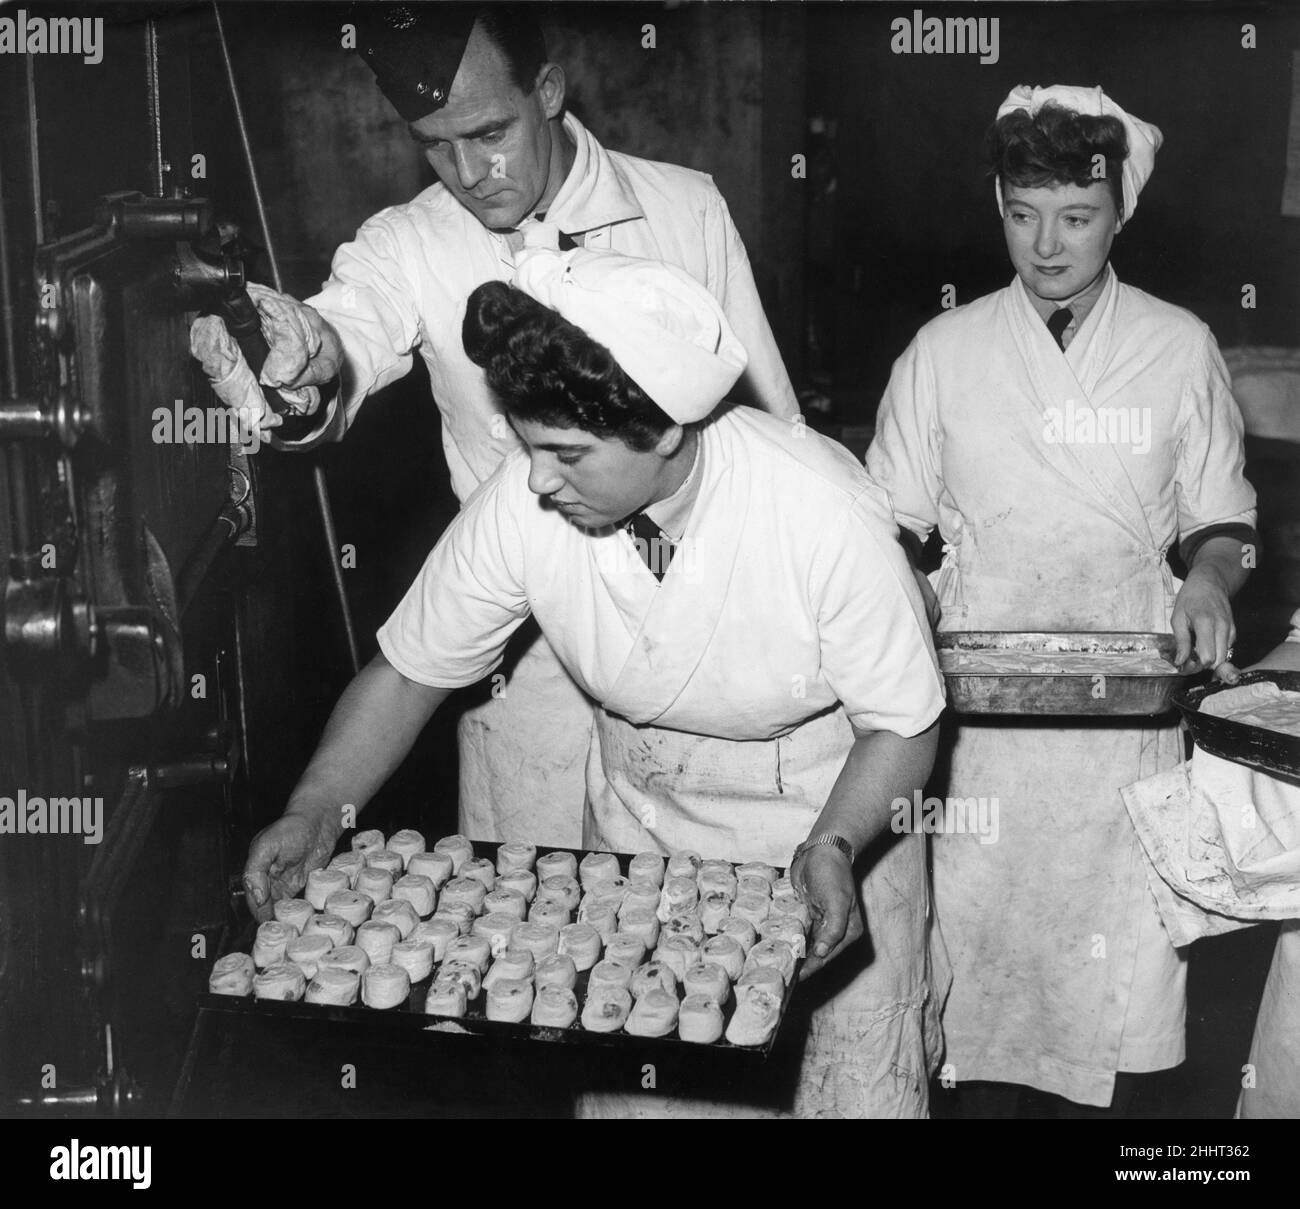 Women baking Swiss Rolls and sultana puddings, put their desserts into the oven during the Diploma course at the John Heddon RAF Cookery School in Hatton. 7th November 1944. Stock Photo